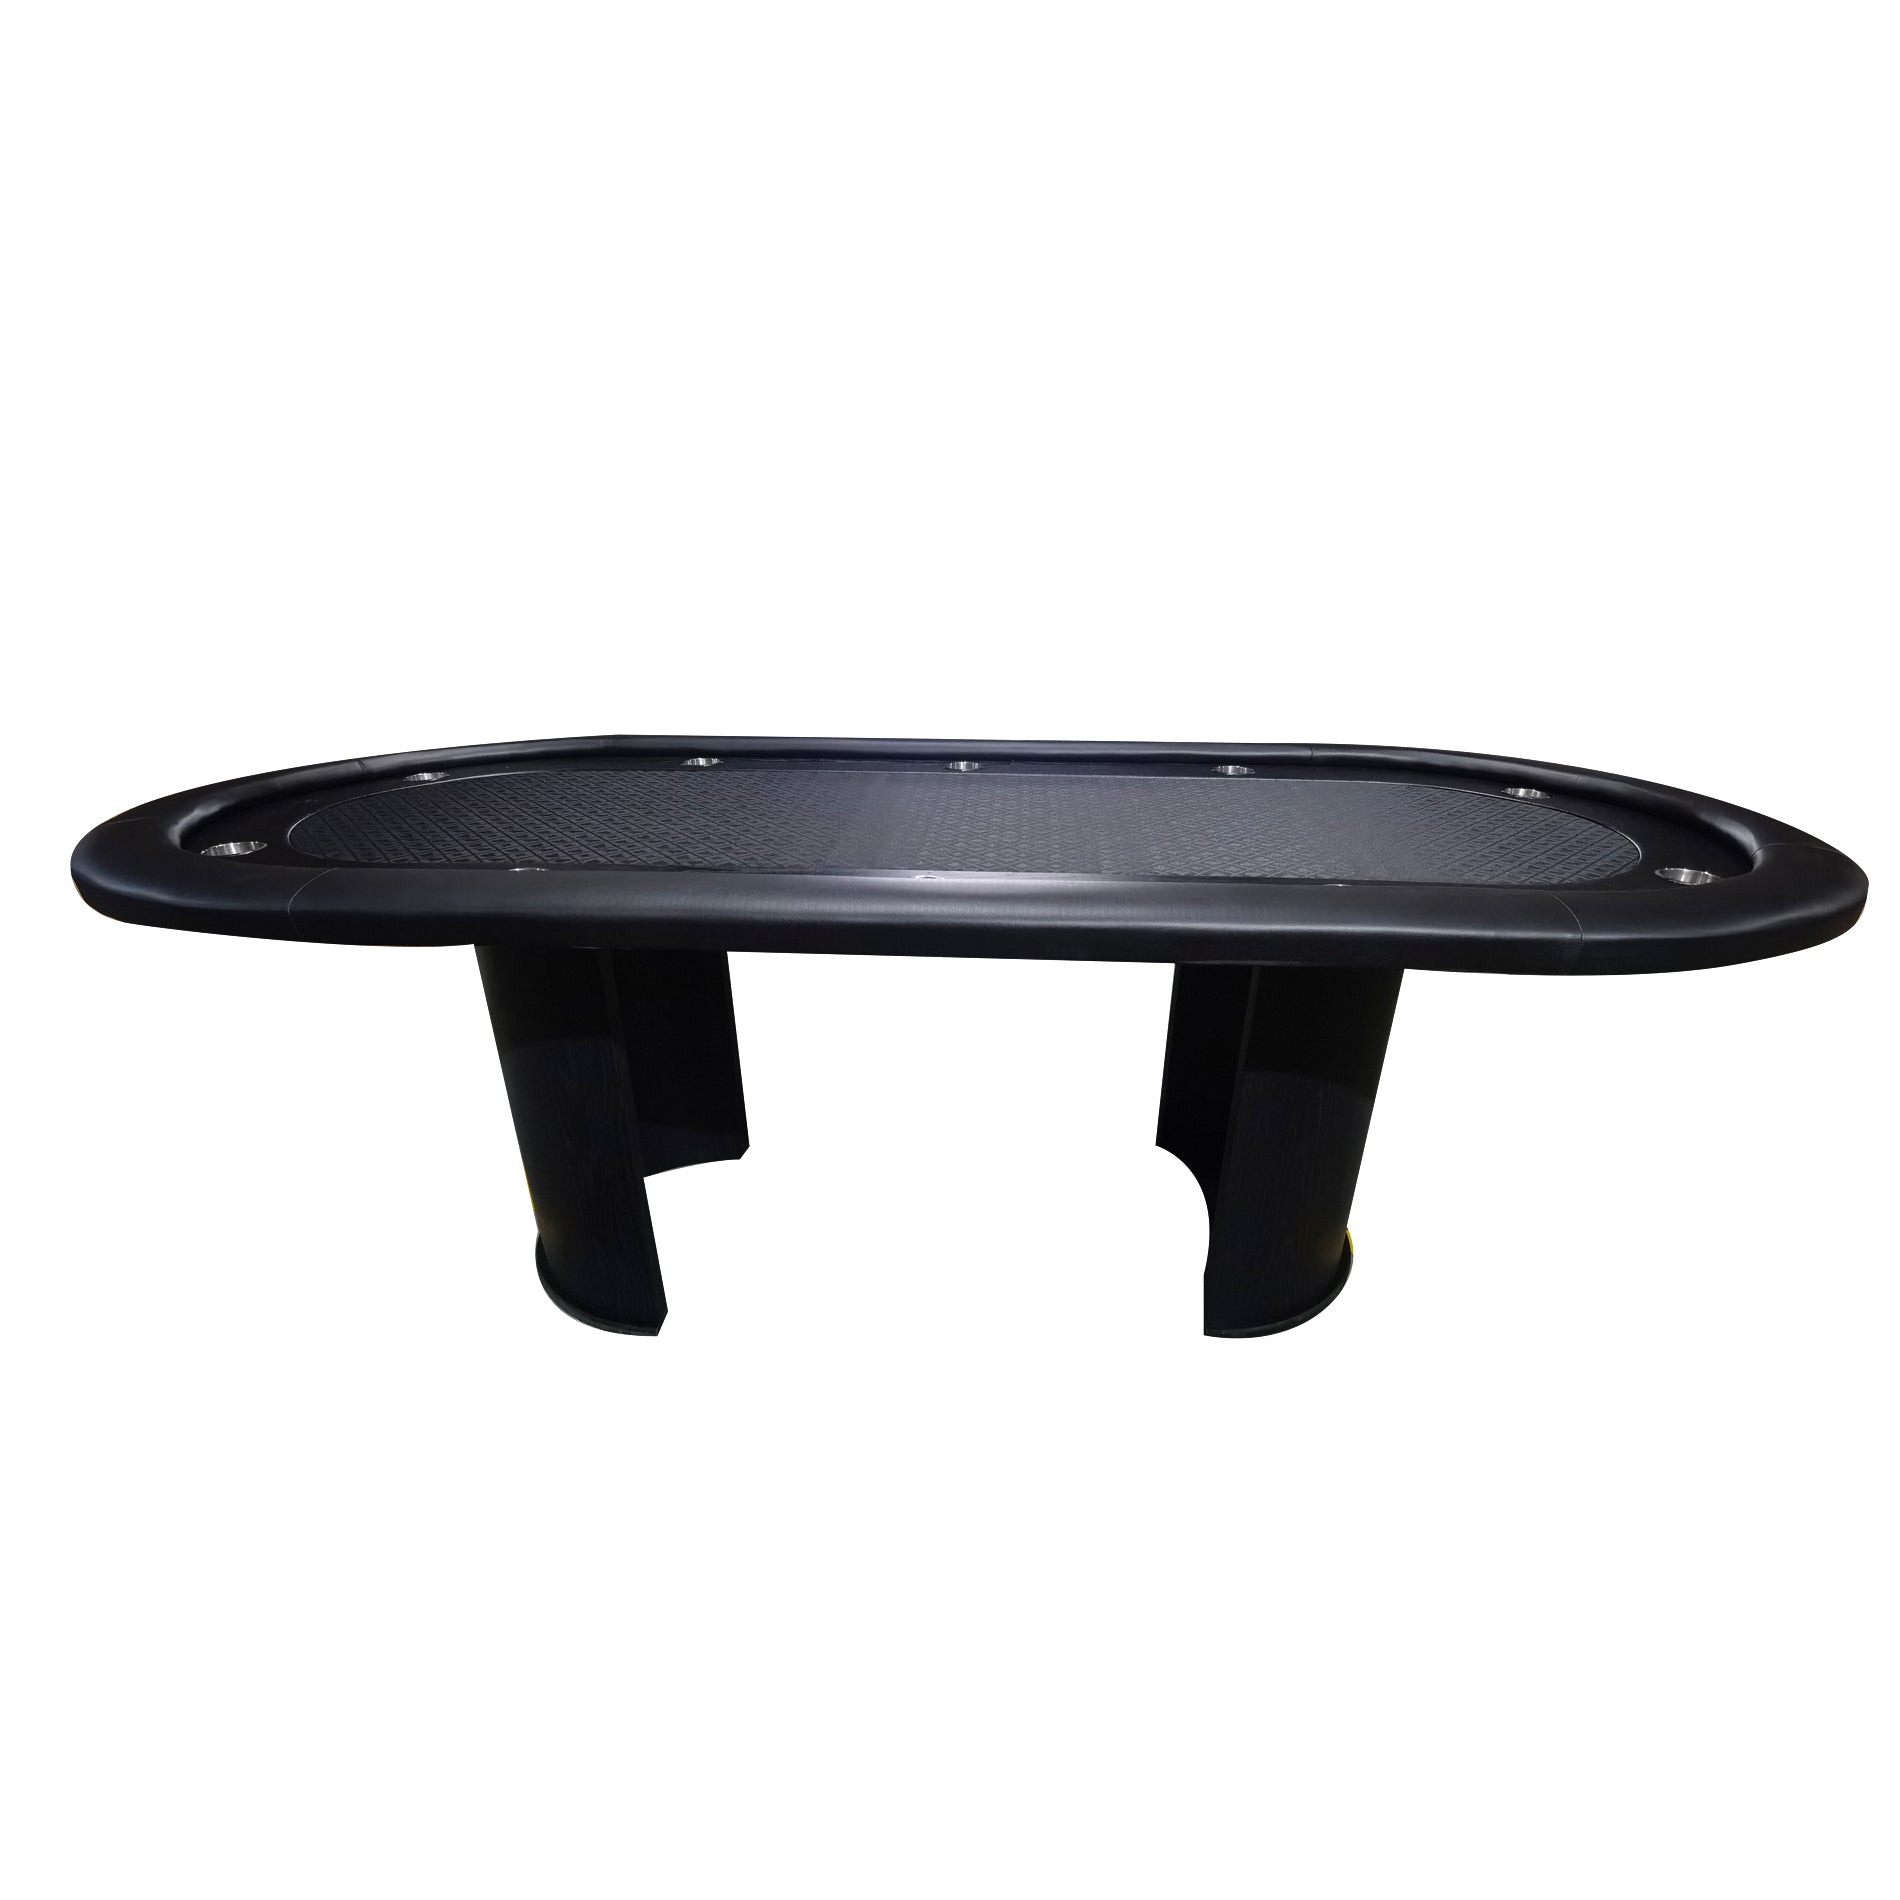 96" Oval 10 Players Black Surface Wooden black-espresso-primary living space-wood